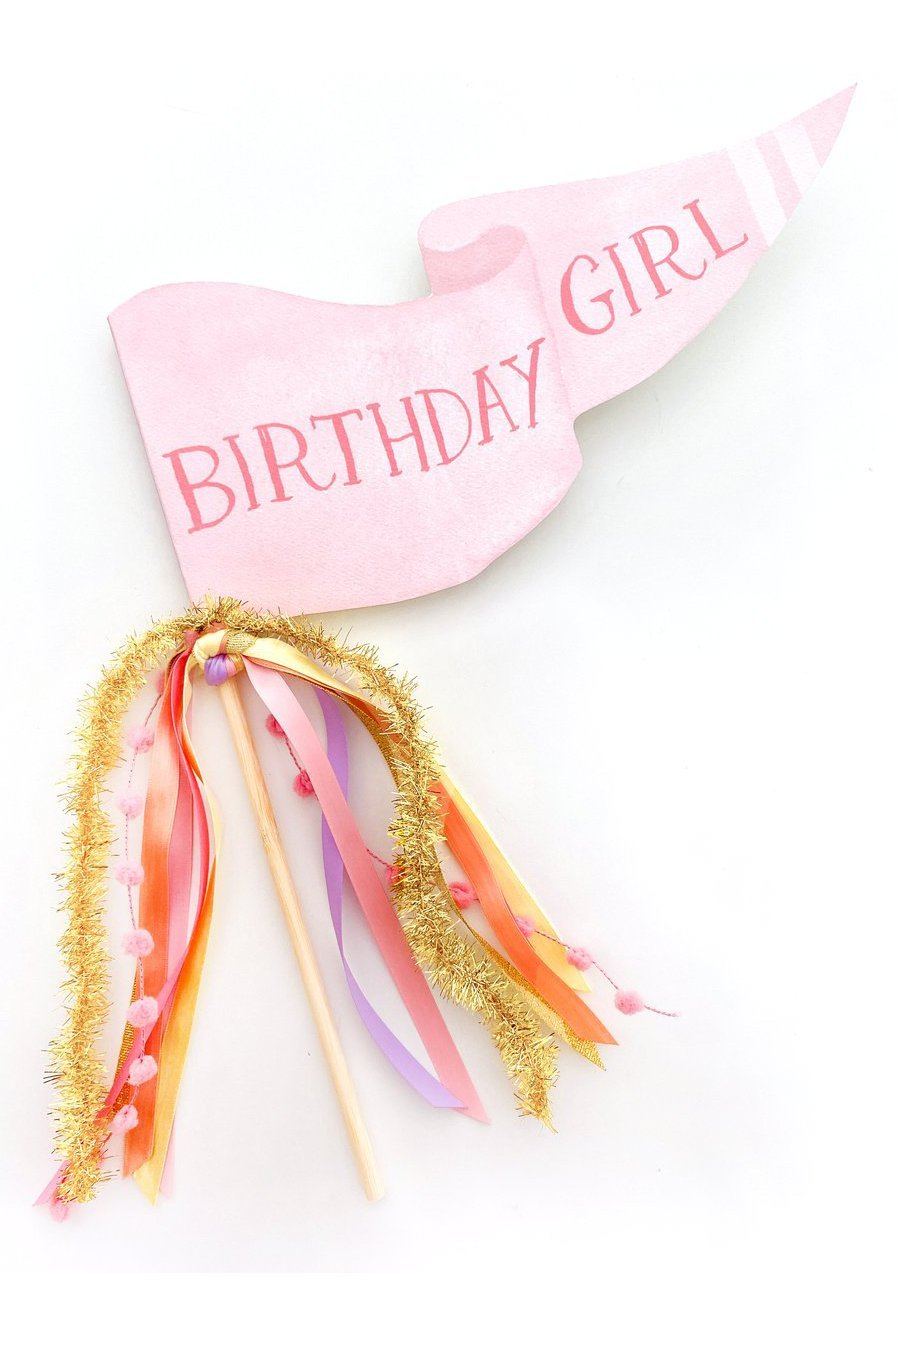 Birthday Girl Party Pennant - Tea for Three: A Children's Boutique-New Arrivals-TheT43Shop